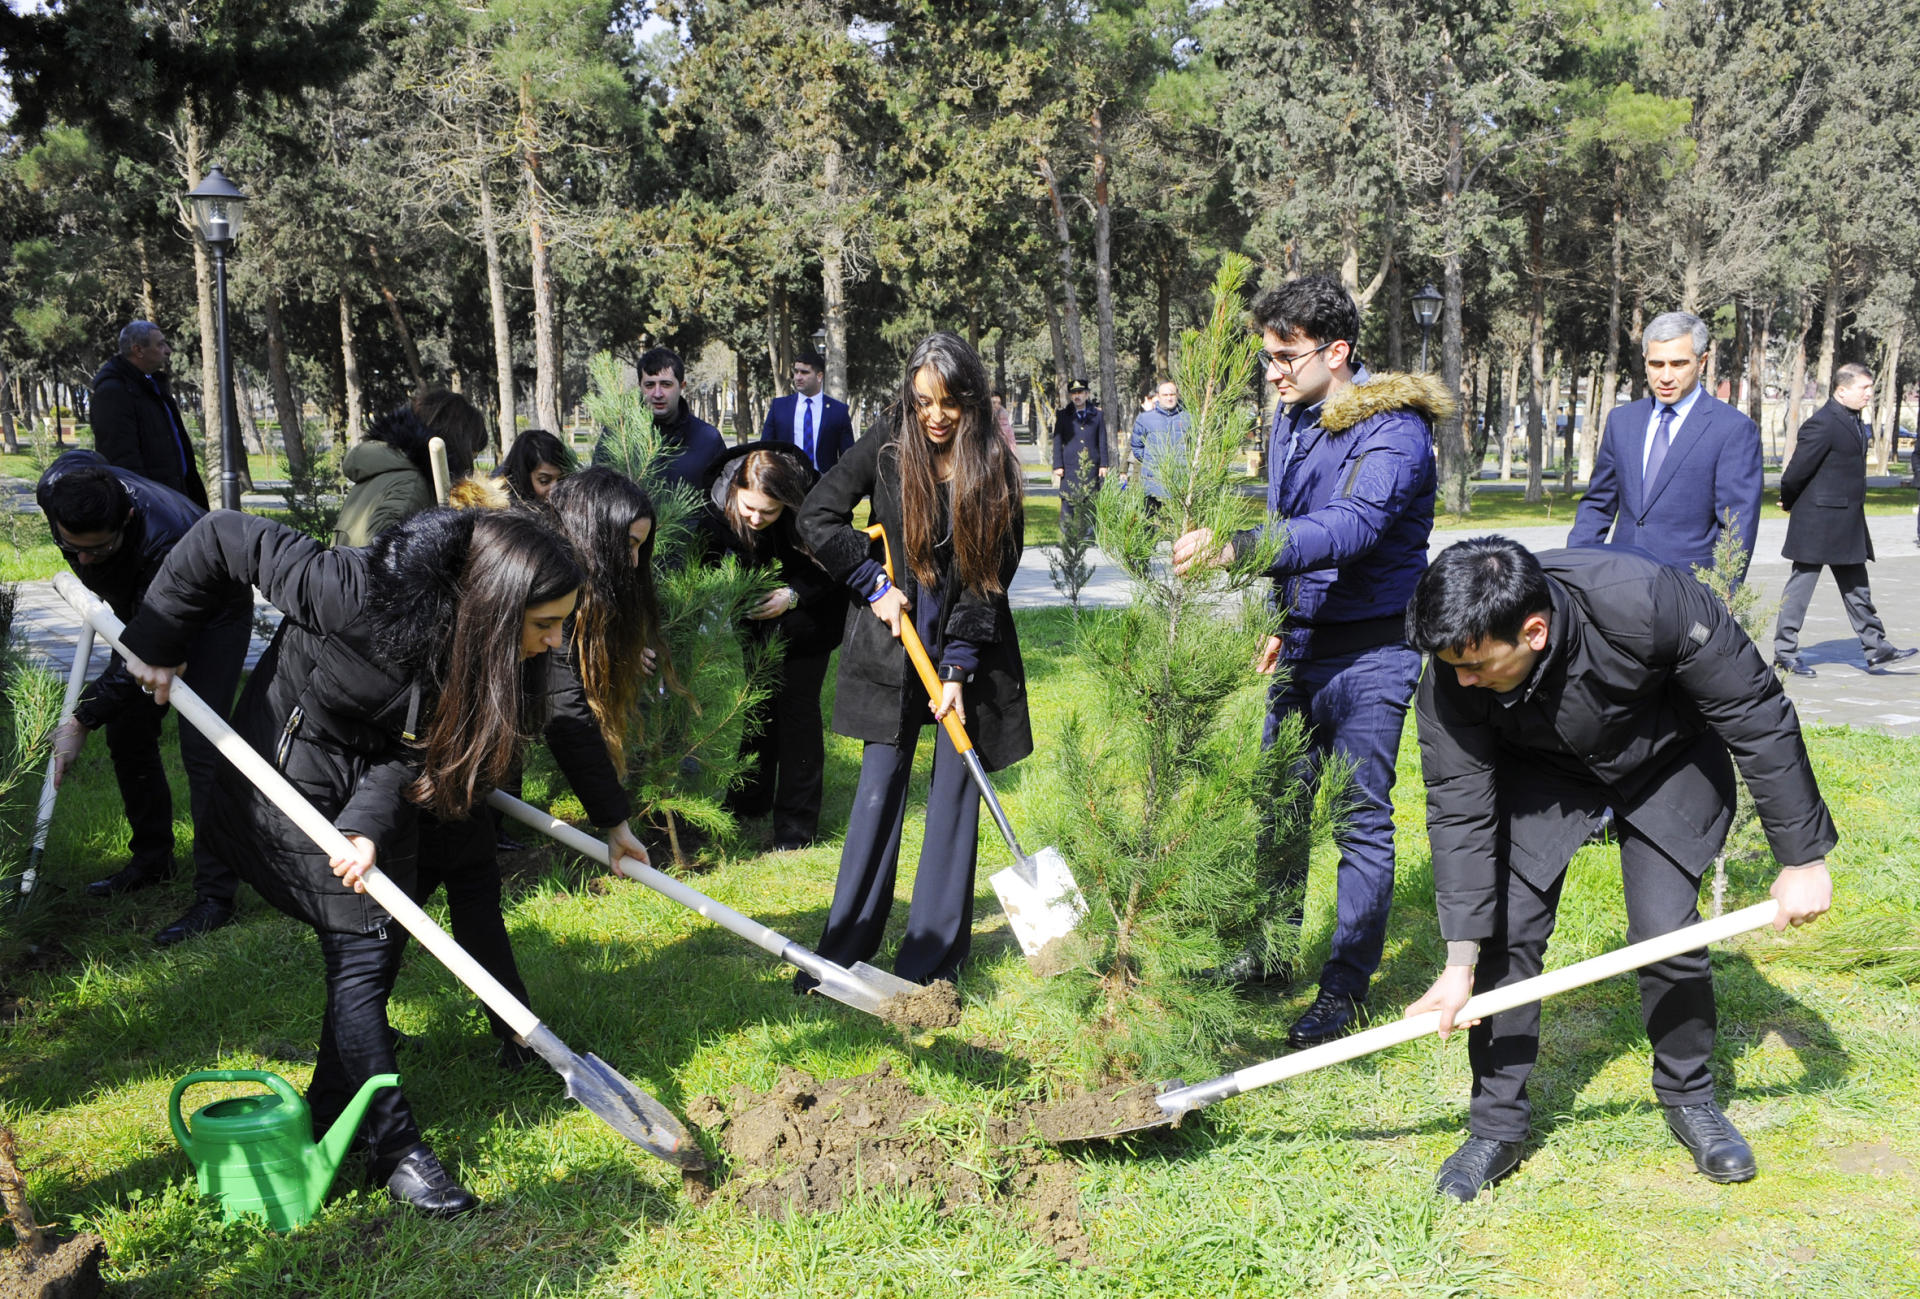 Heydar Aliyev Foundation VP Leyla Aliyeva takes part in tree planting event under "Justice for Khojaly" campaign (PHOTO)